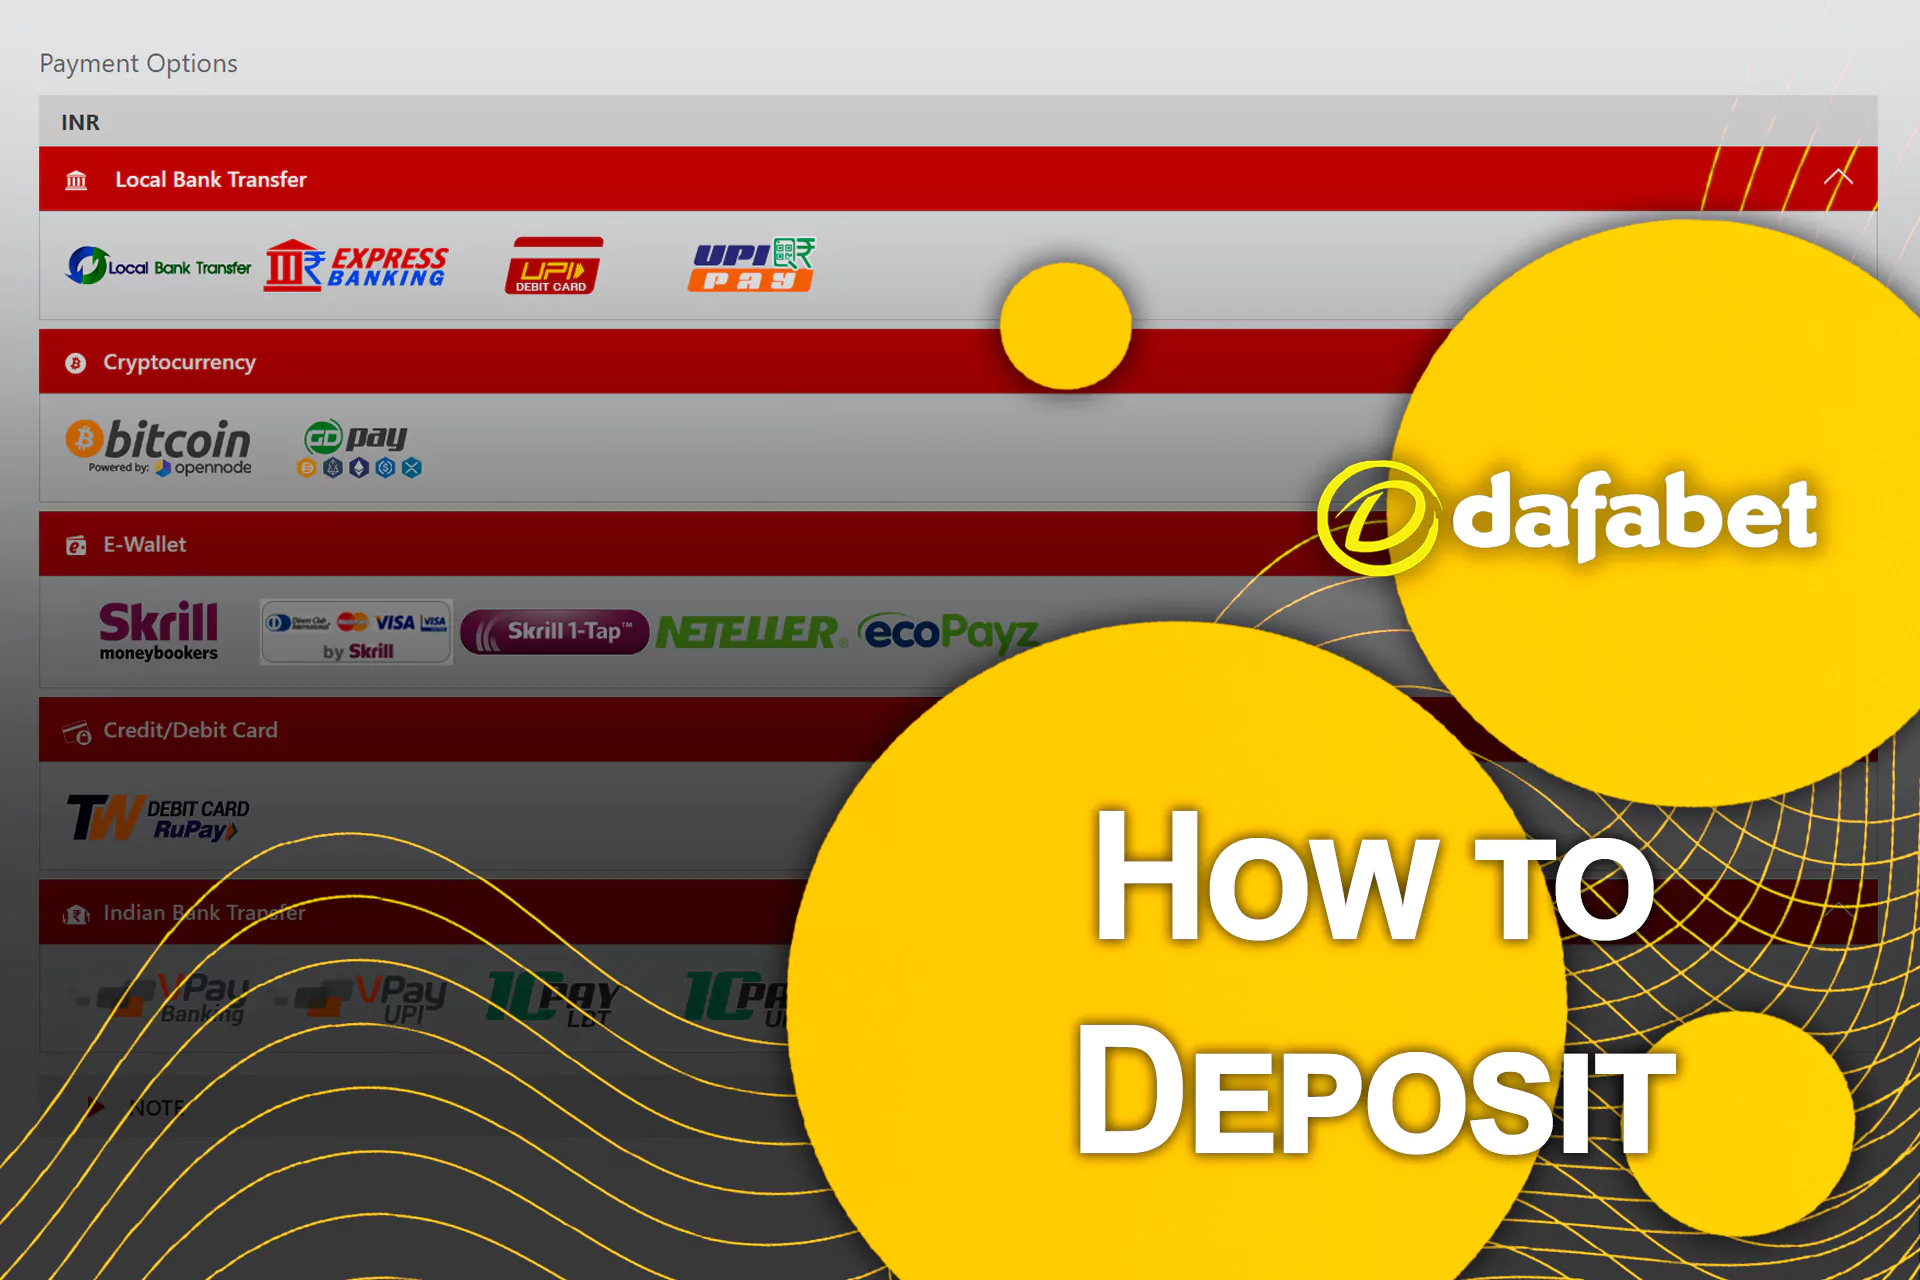 After you register and verify your account, make a deposit to have enough funds for placing bets.